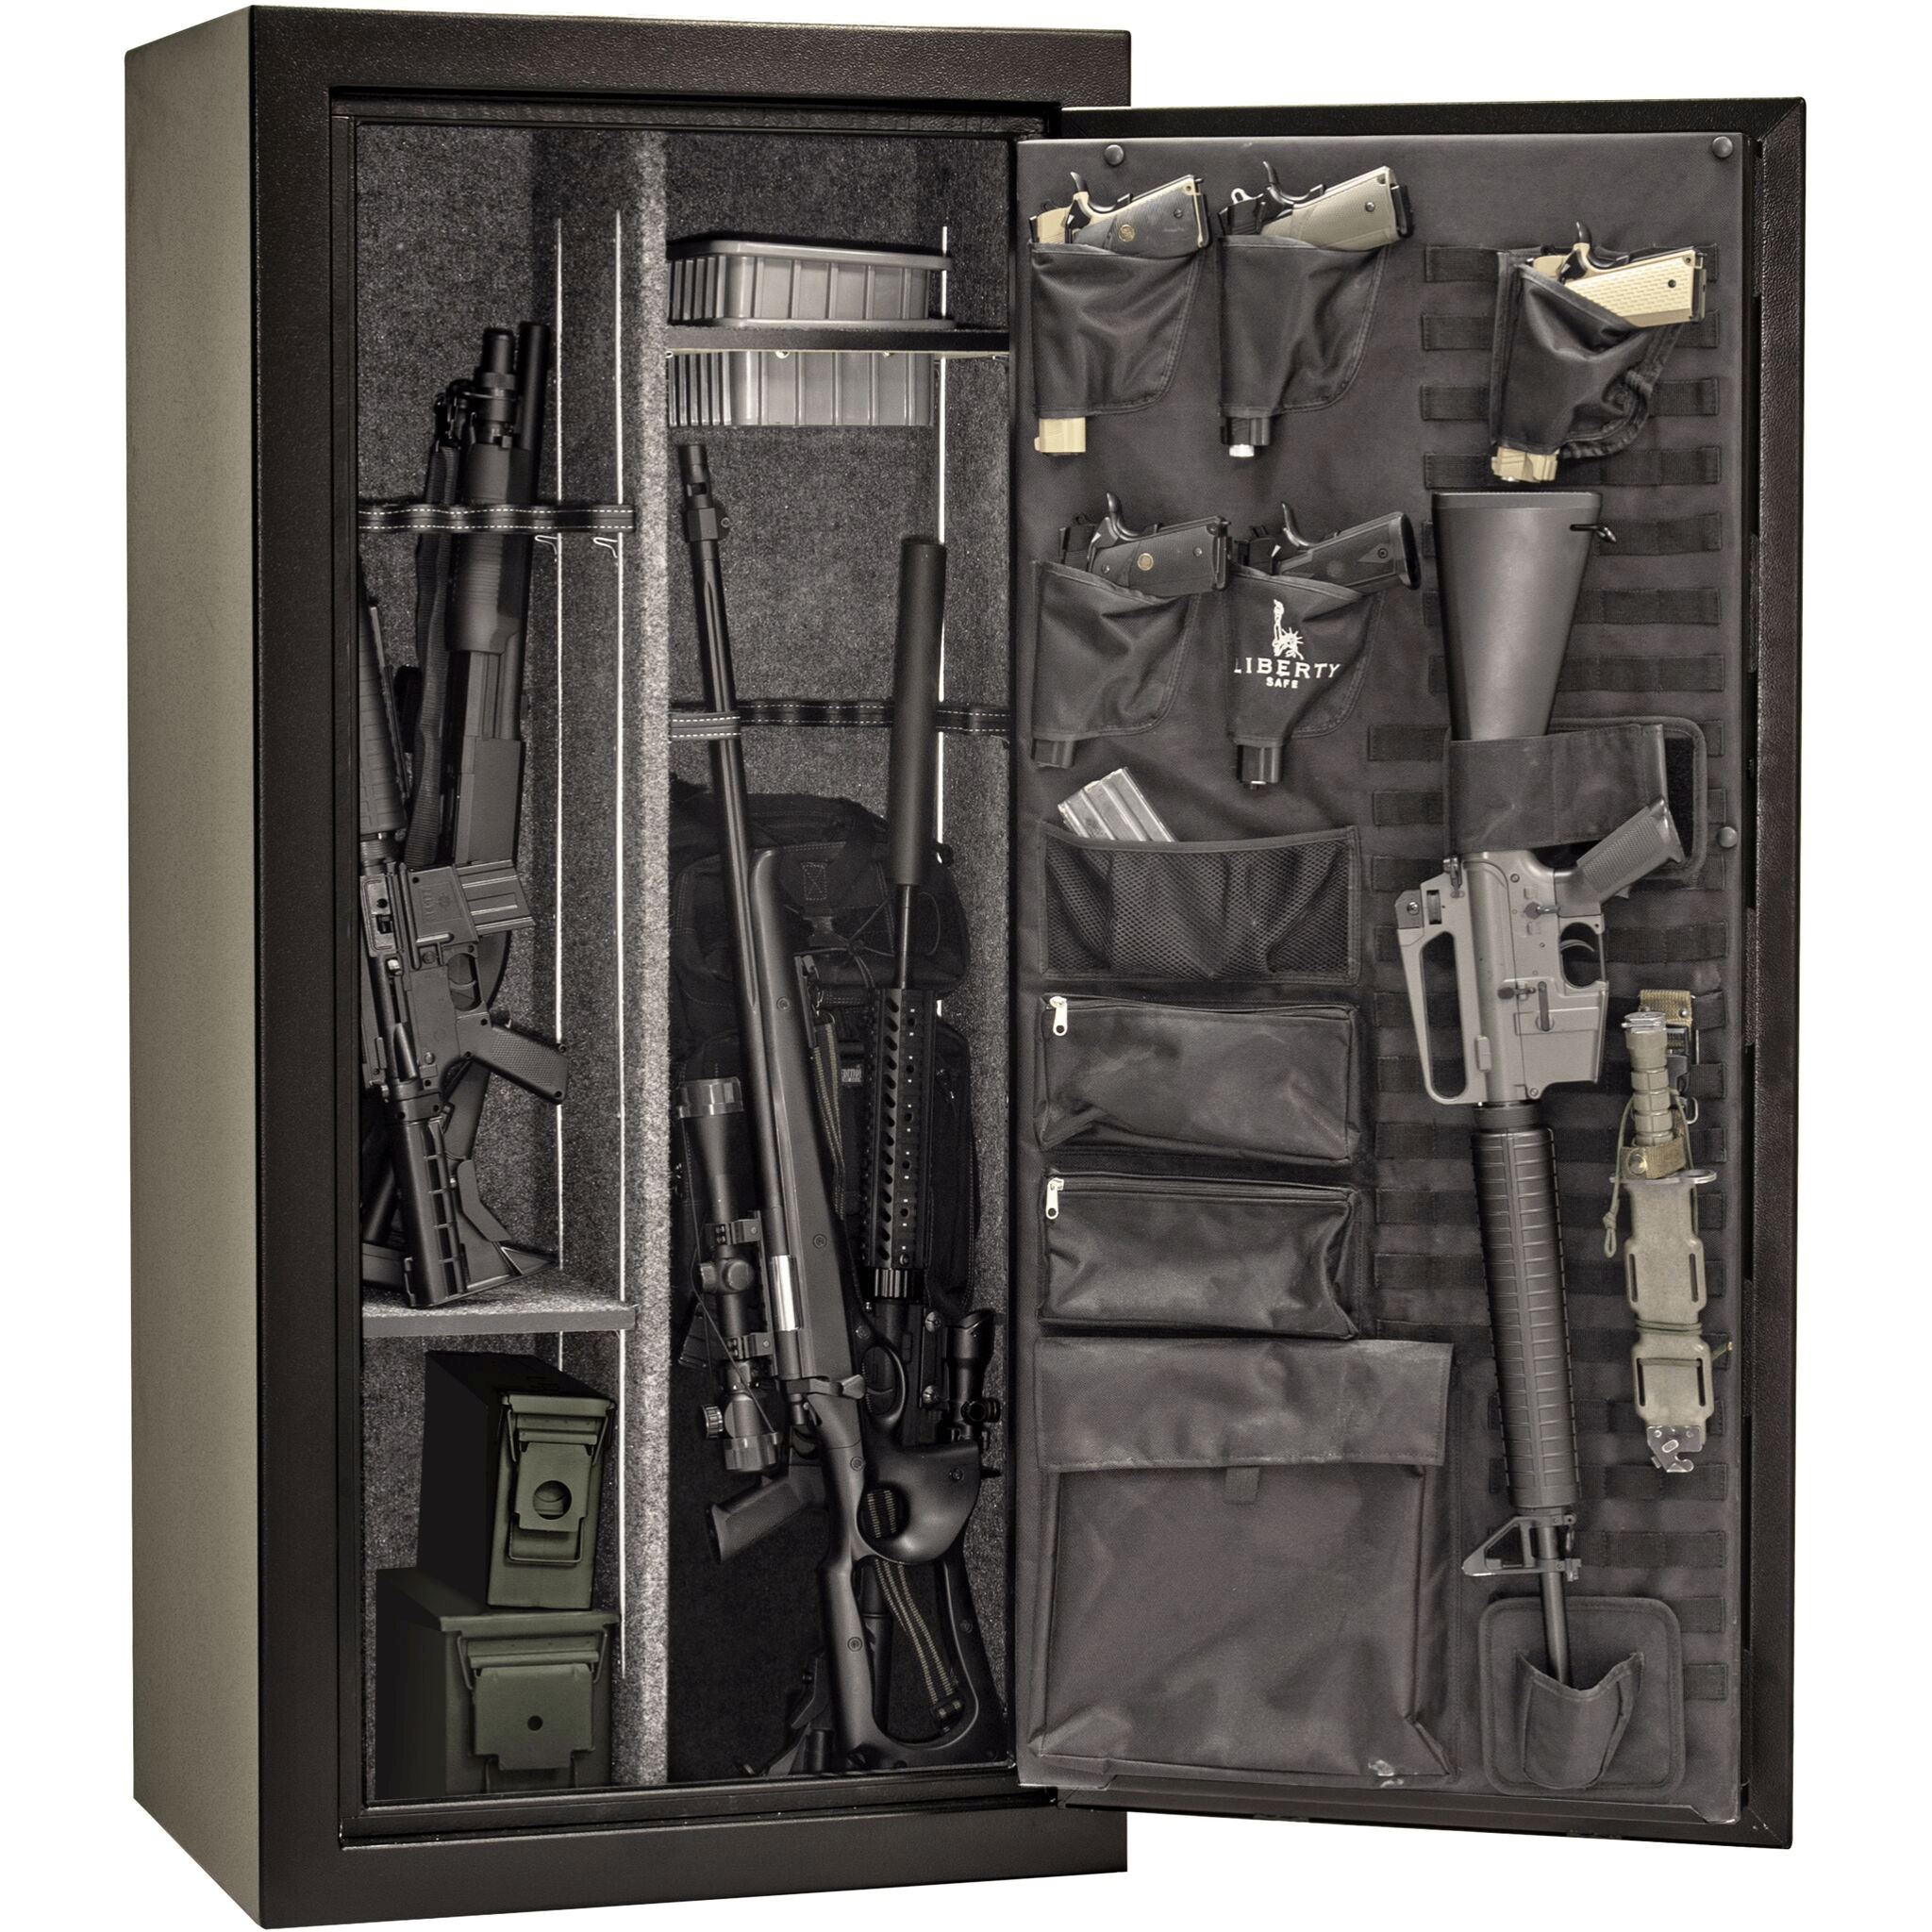 Tactical | 24 | 30 Minute Fire Protection | Black | Black Mechanical Lock | 59.5"(H) x 28.25"(W) x 22"(D)